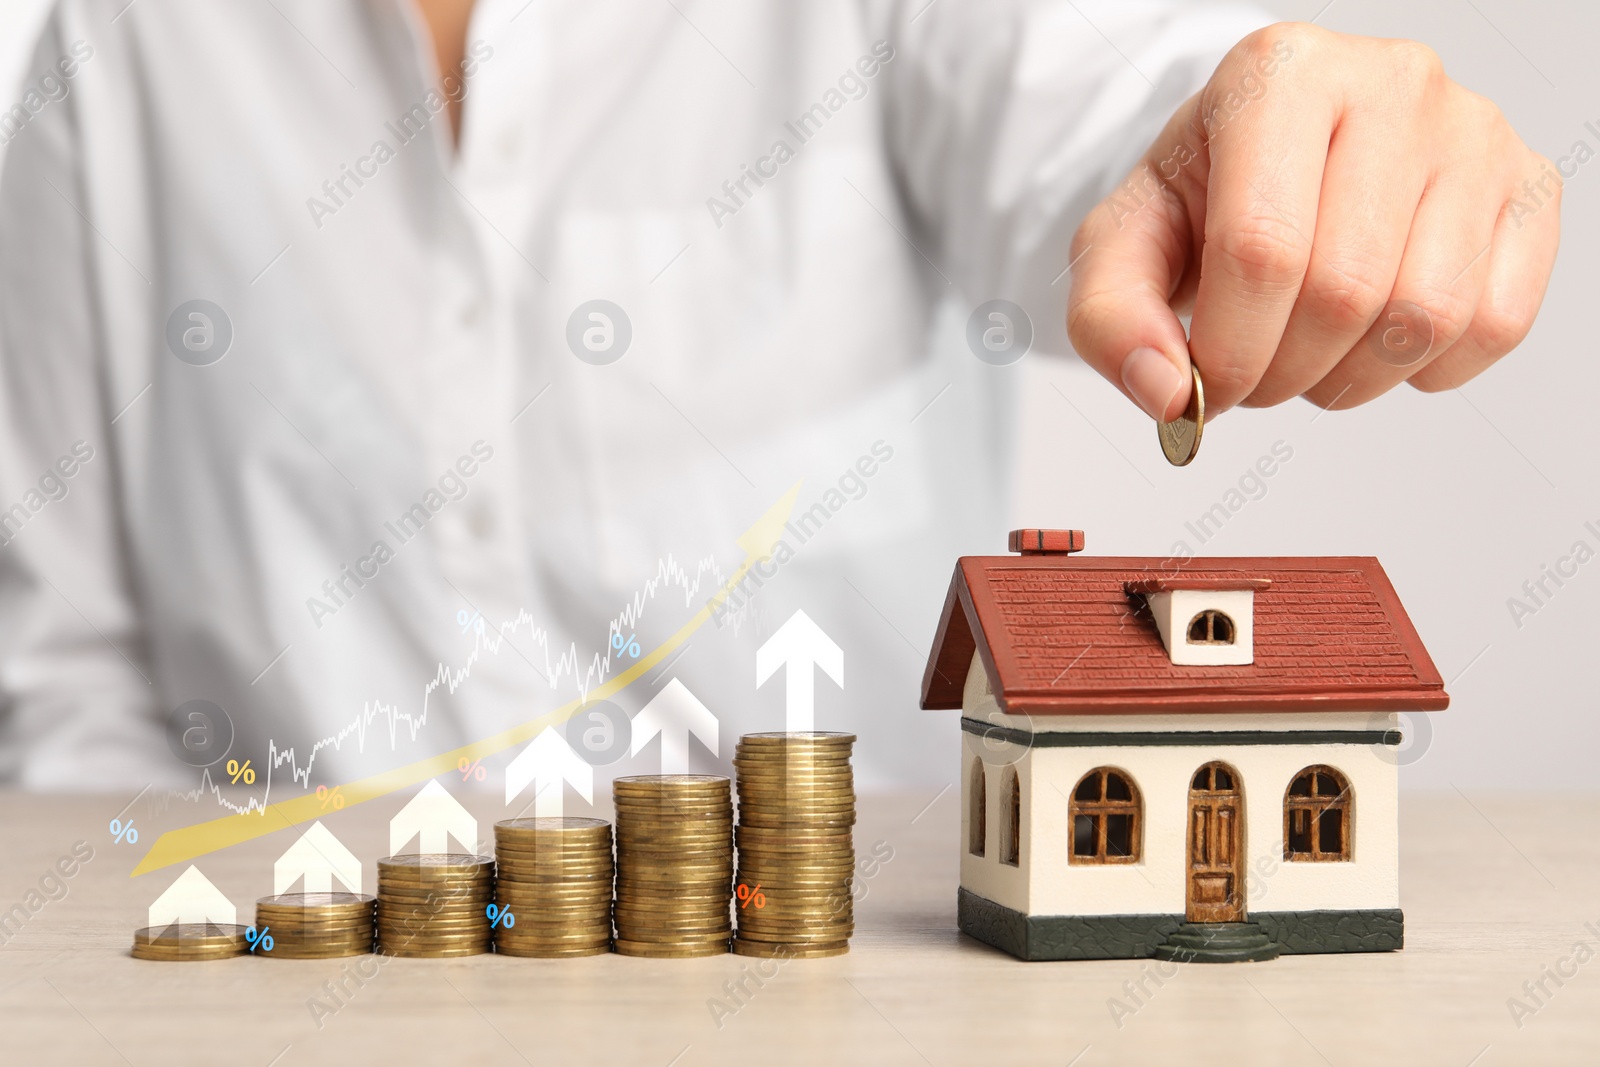 Image of Mortgage rate. Woman putting coin into house shaped money box, closeup. Stacked coins, graph, percent signs and arrows